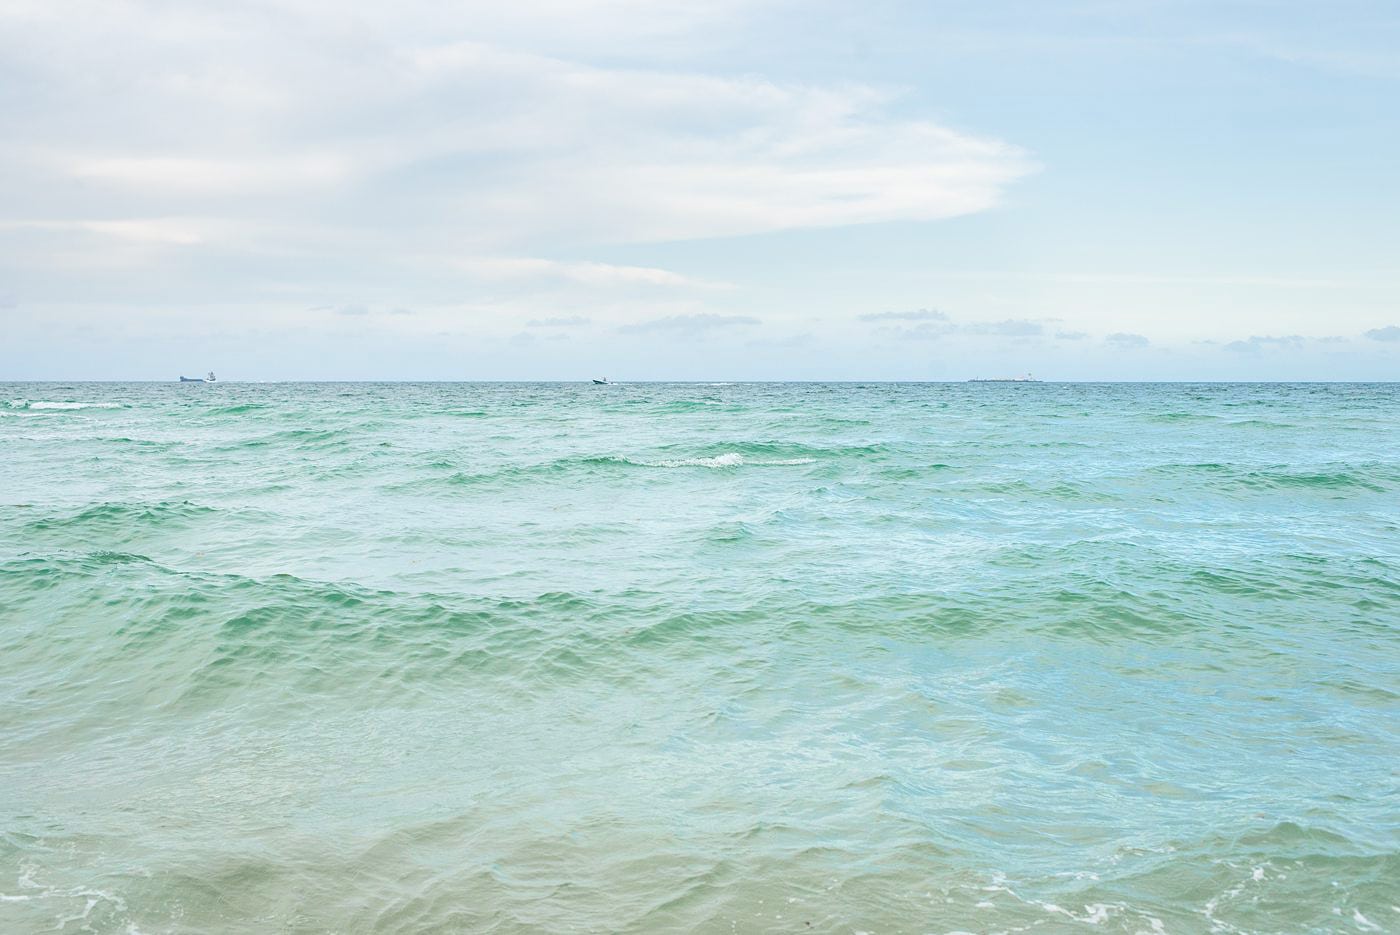 40 Ocean Quotes for People Who Love the Sea